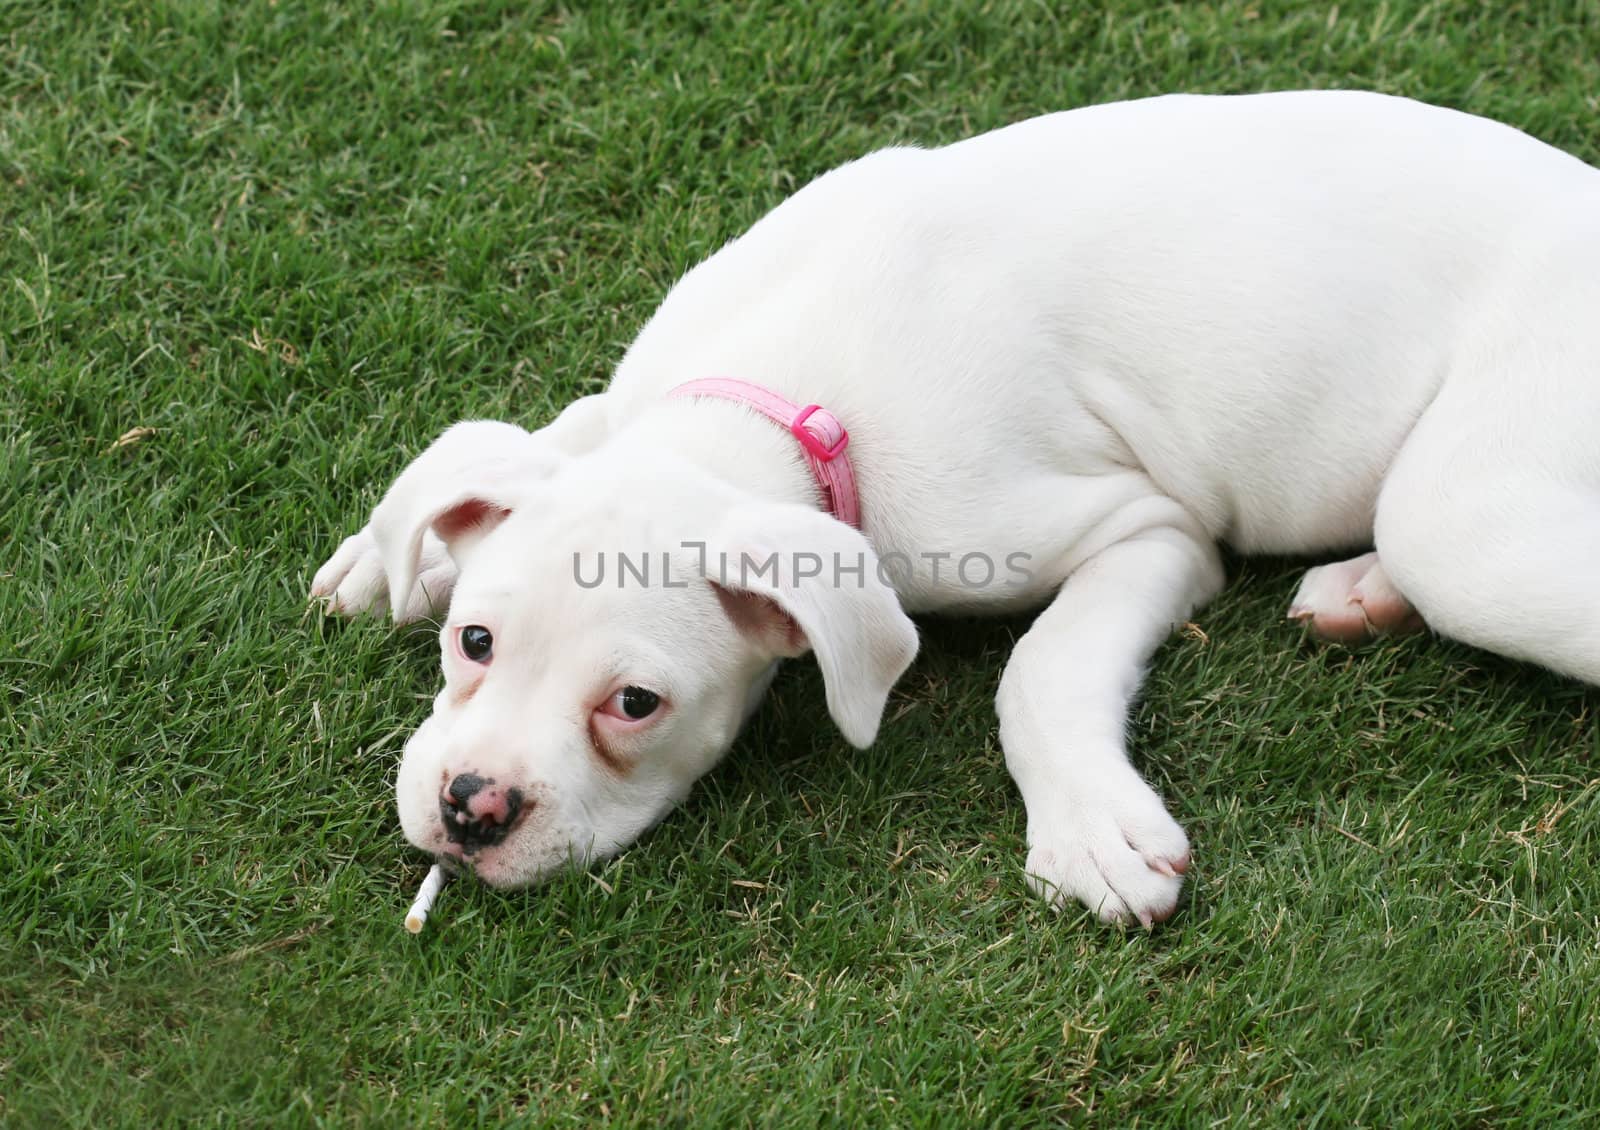 A puppy dog lying on the grass smoking a cigarette